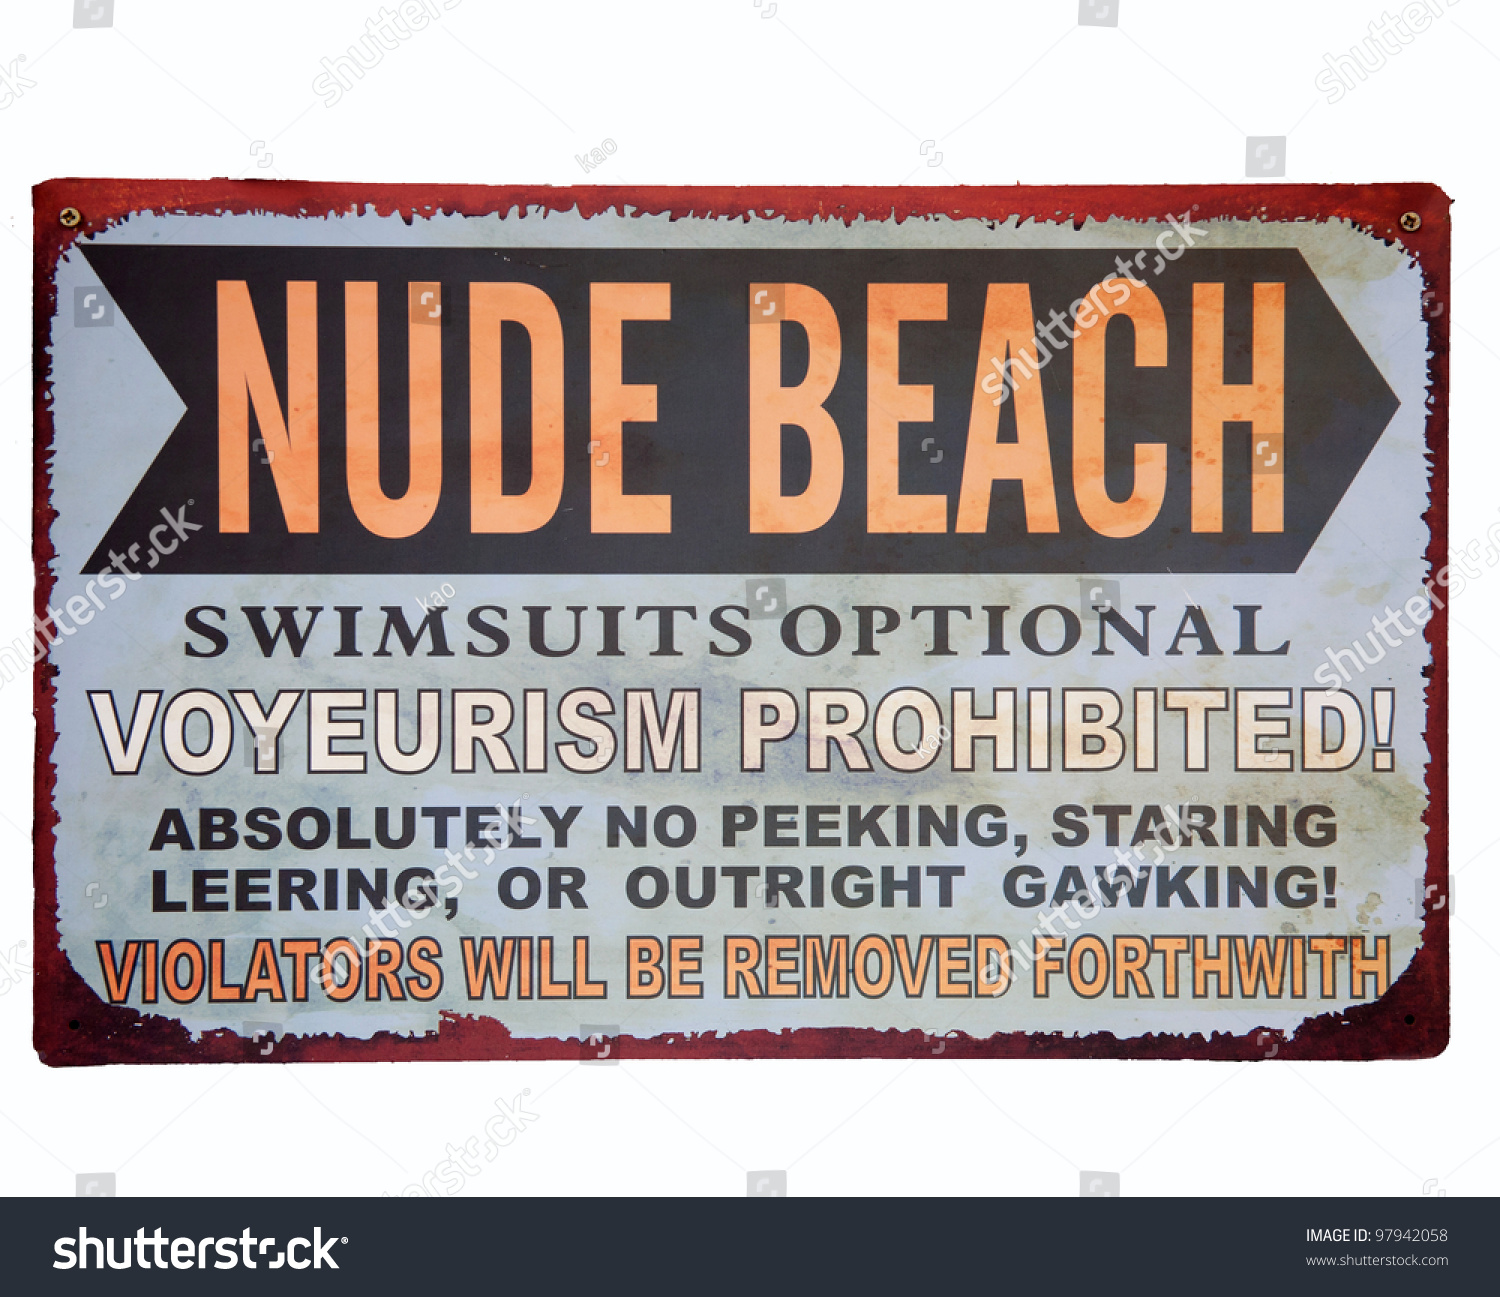 Nude Beach Signsign Board Stock Photo pic